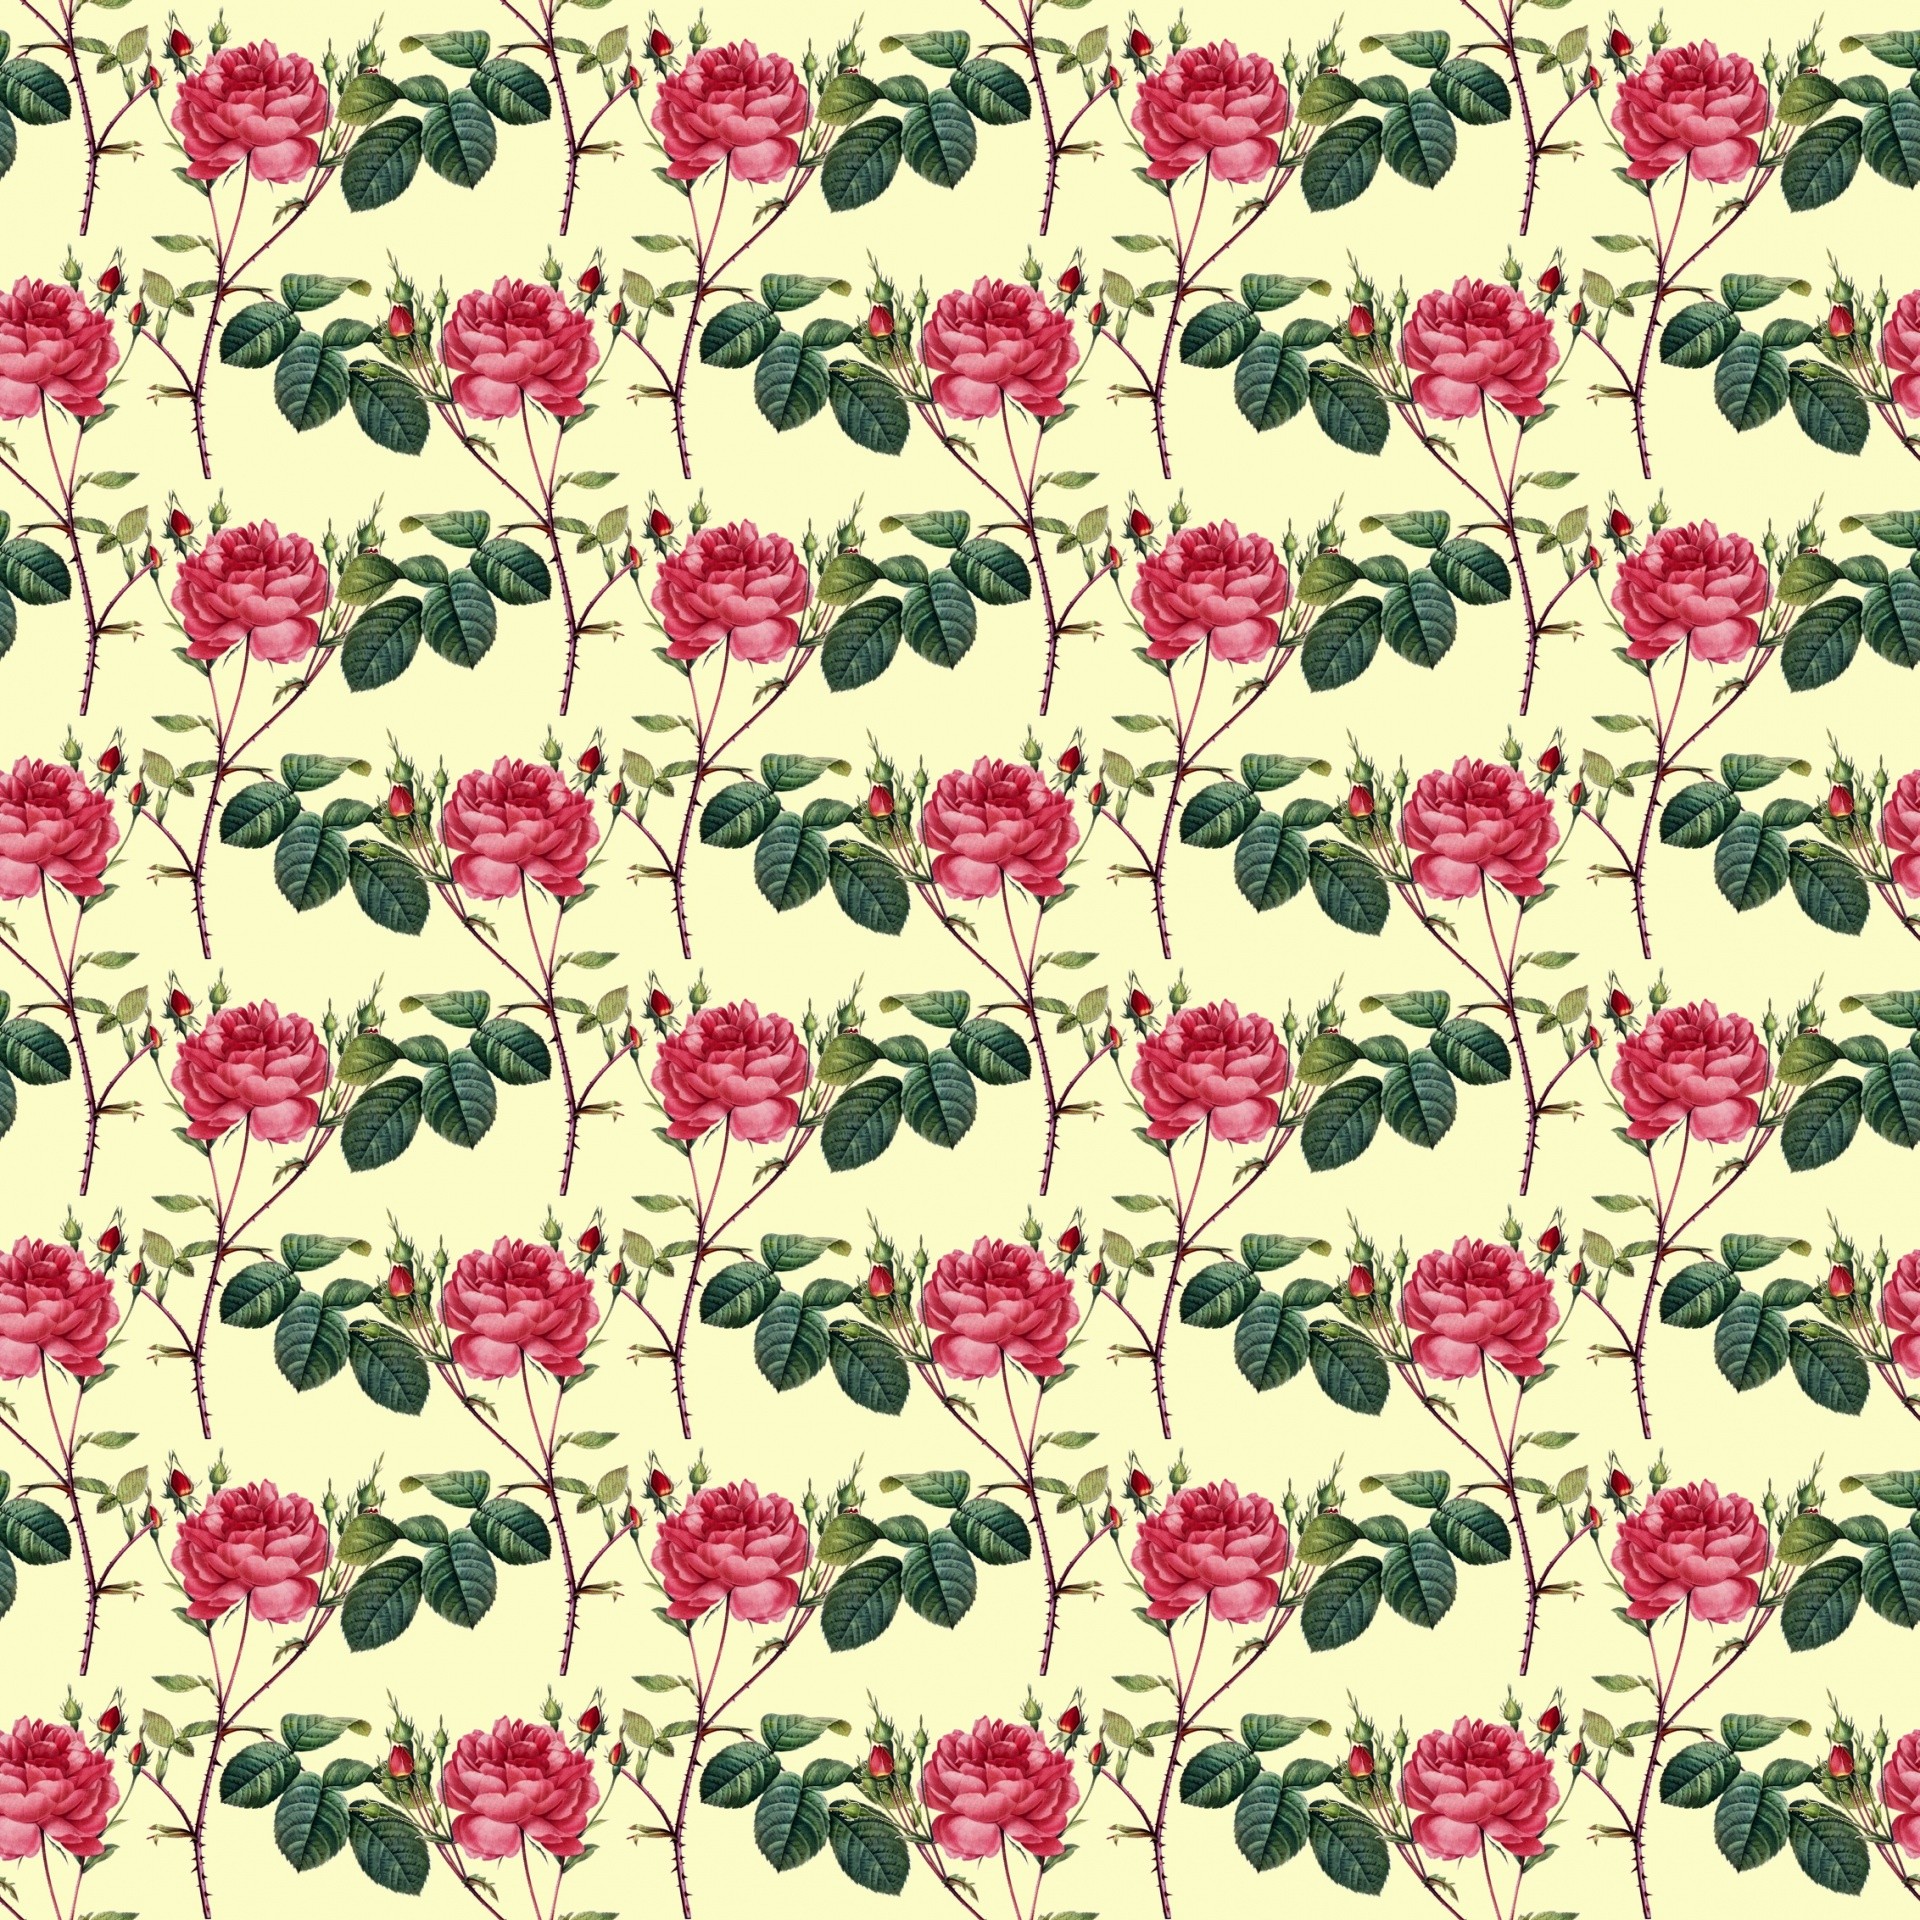 1920x1920 roses,red,flowers,vintage,wallpaper,paper,background,pattern,